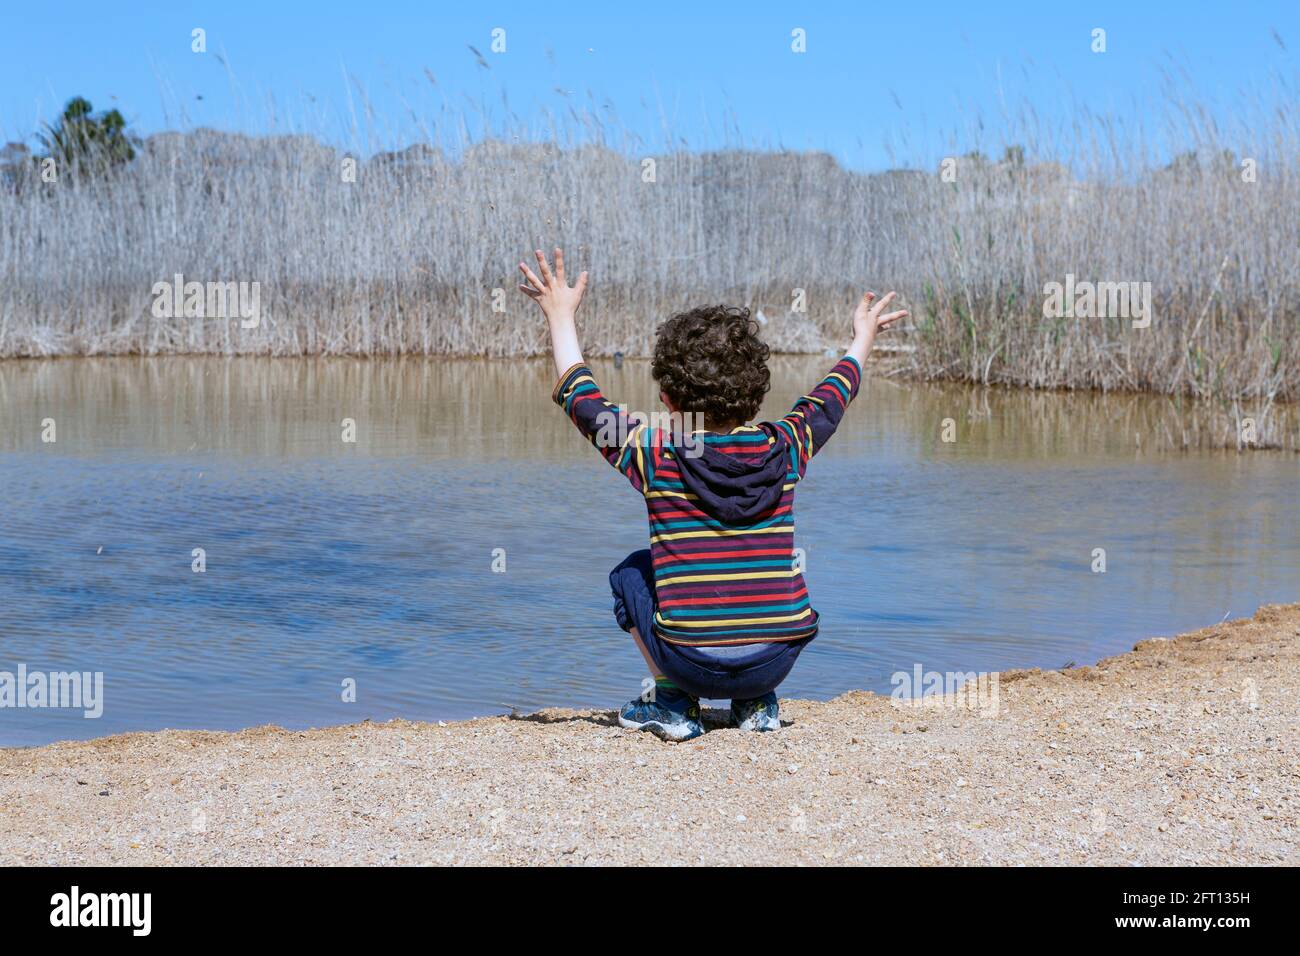 Little boy crouched at the edge of the pond with curly hair and colored striped polo shirt, playing with his arms raised. Stock Photo